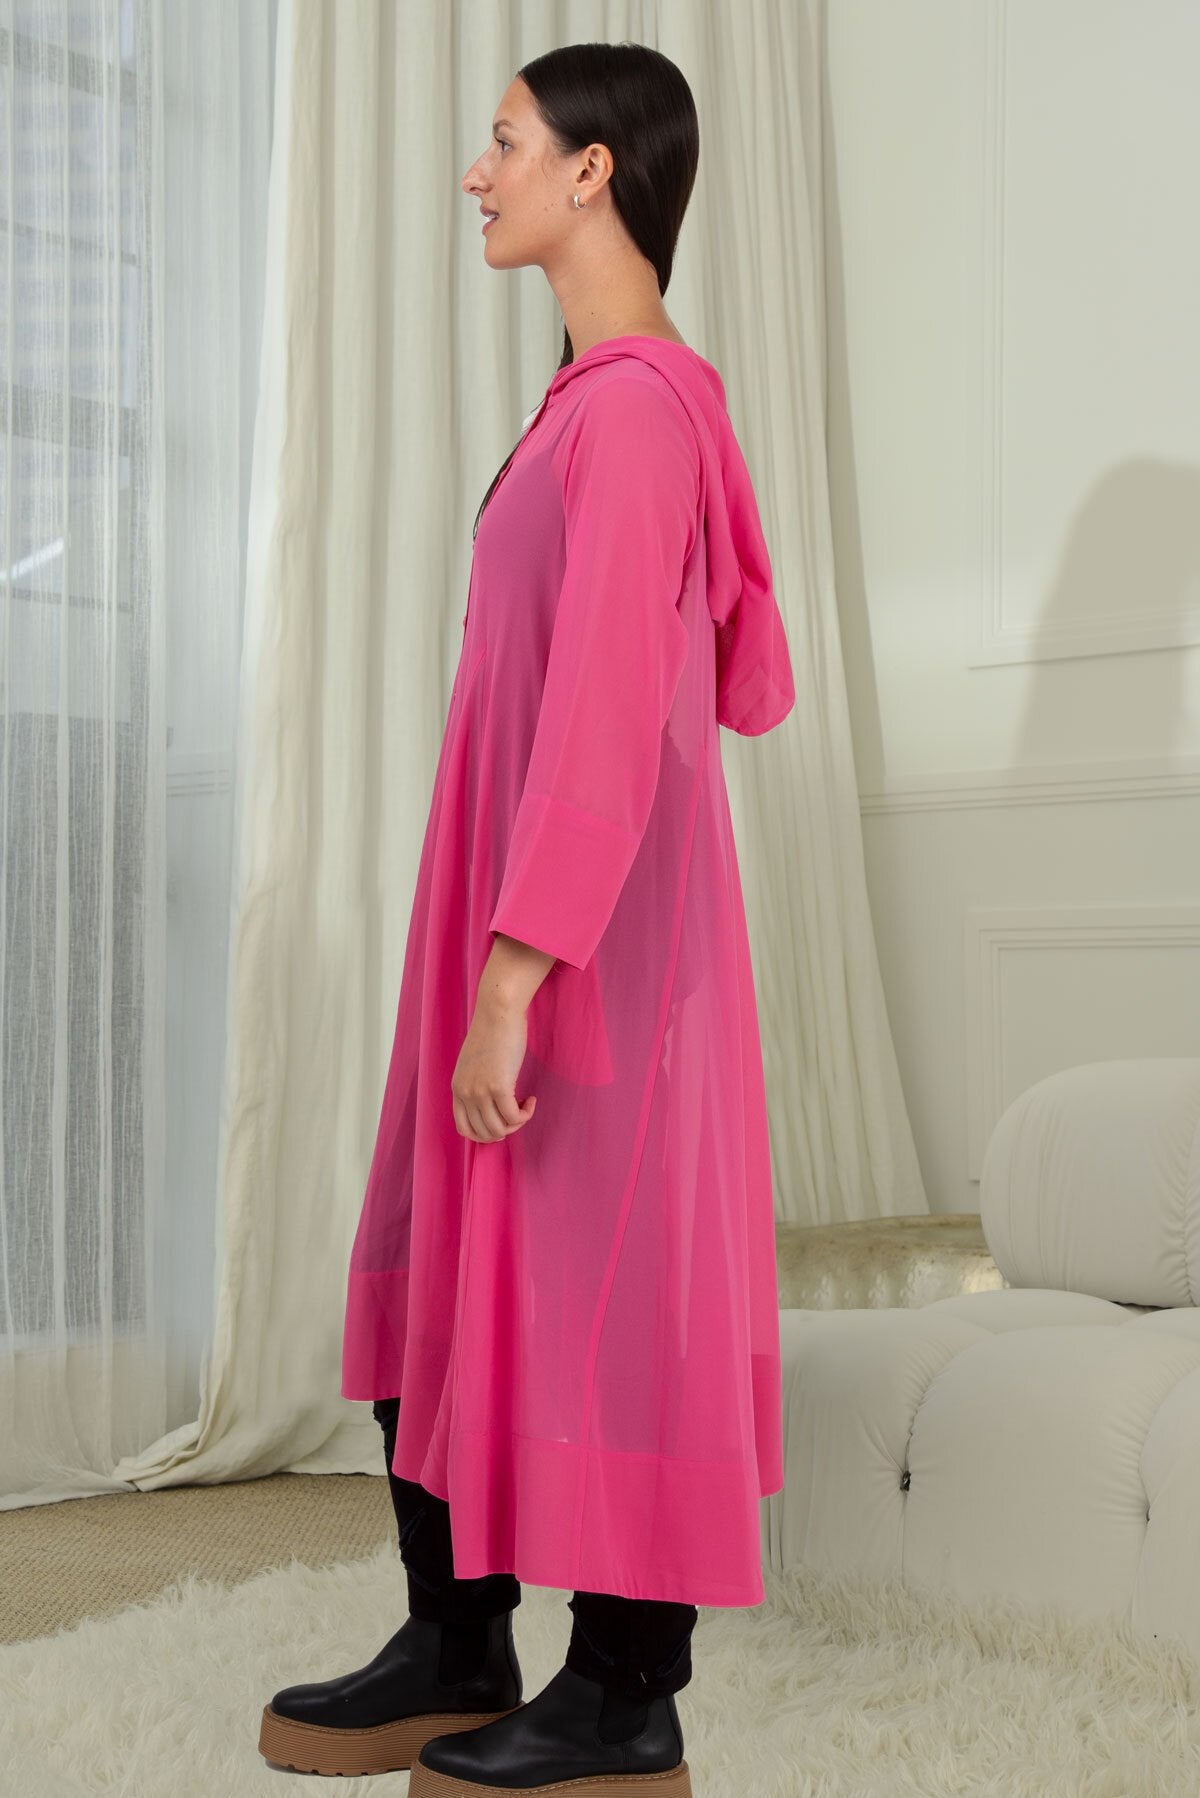 CURATE UNDERCOVER DRESS - PINK - THE VOGUE STORE